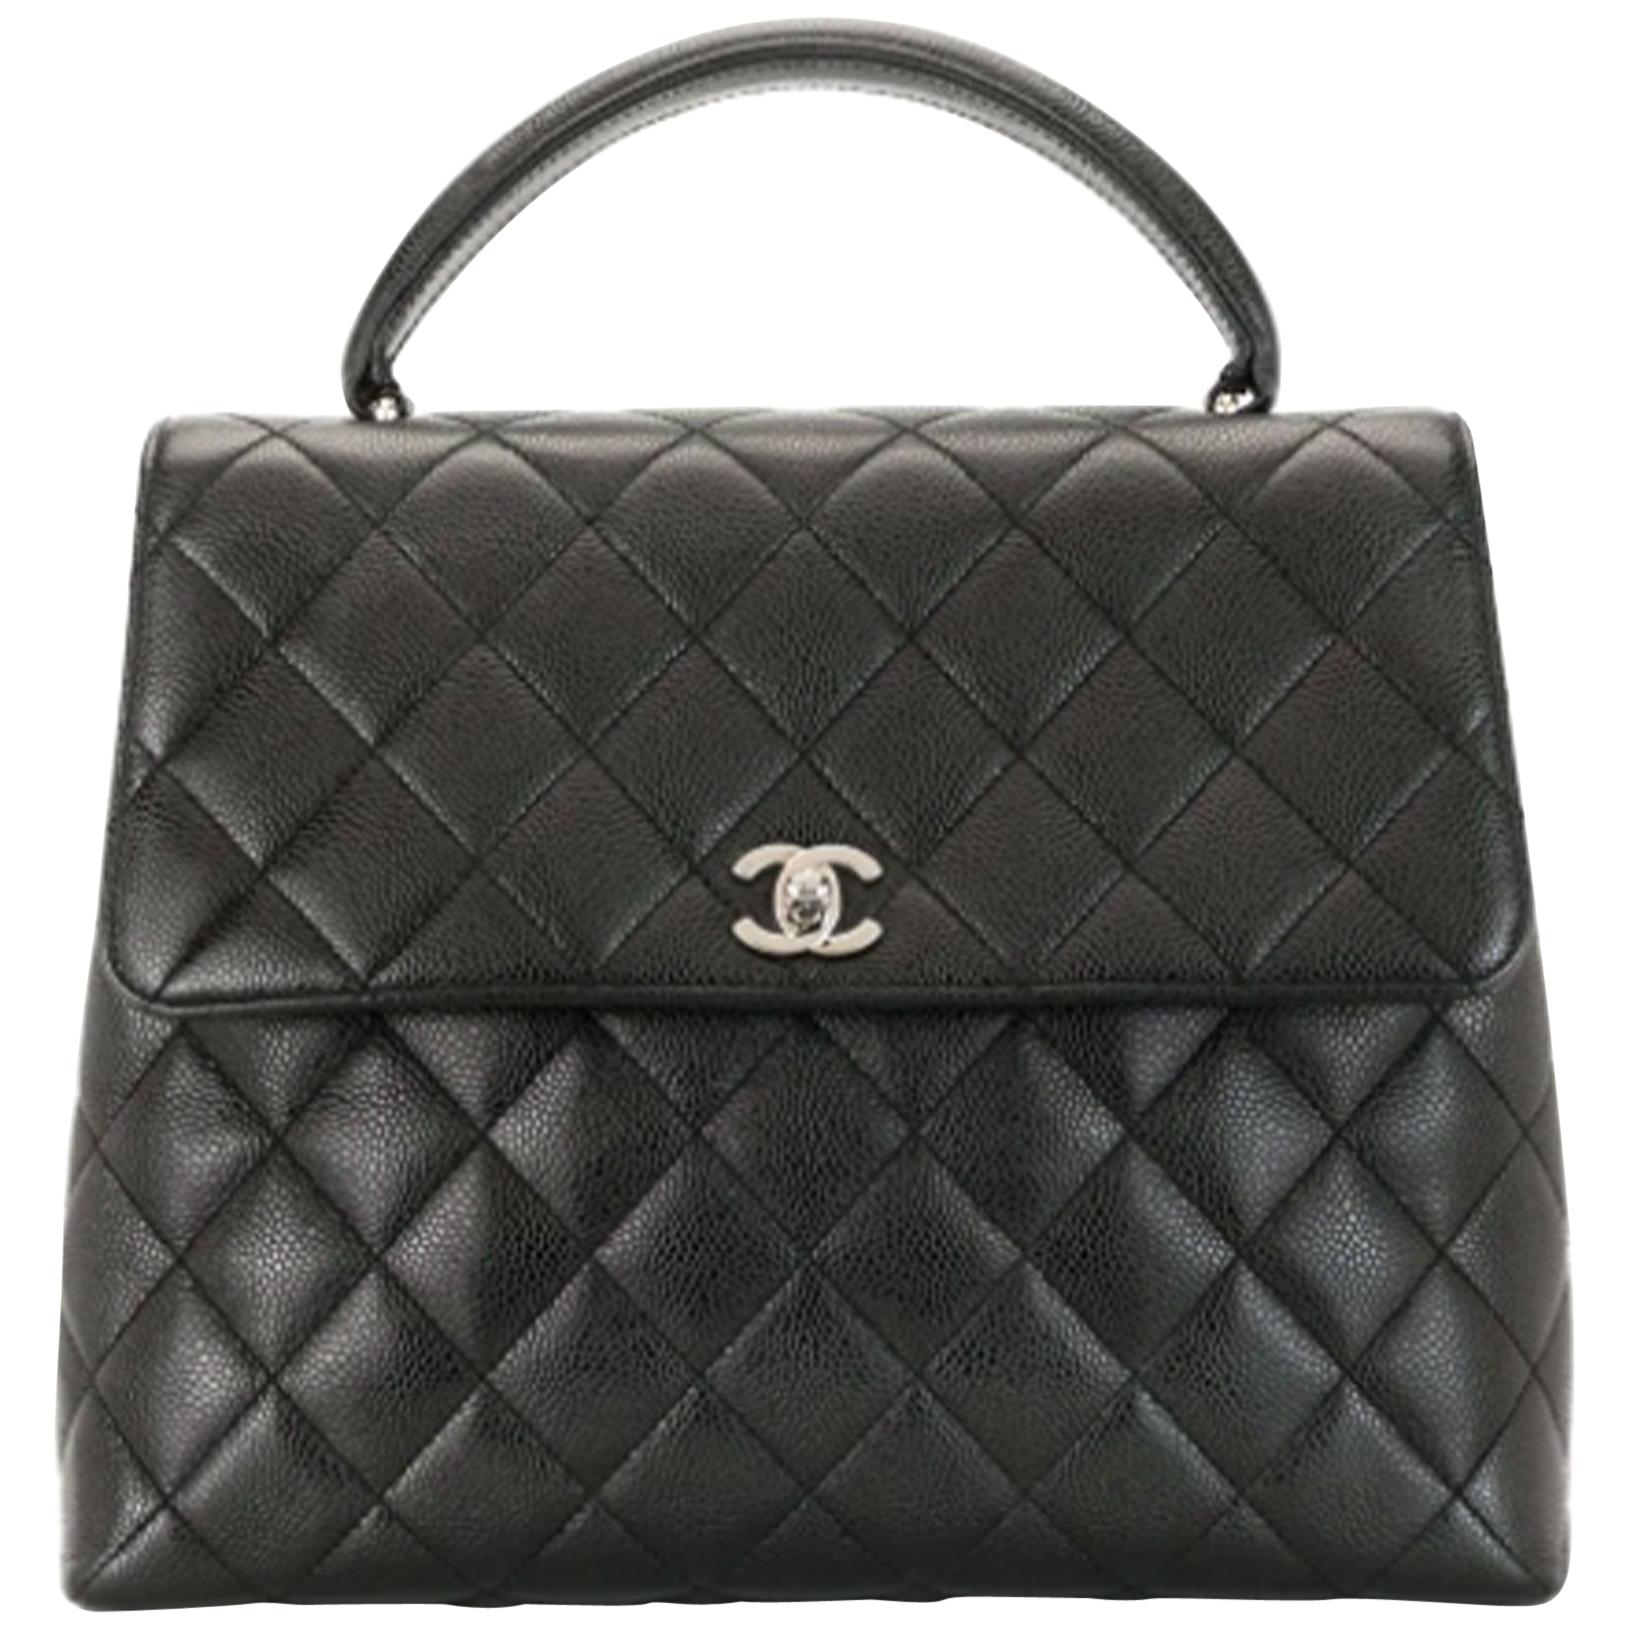 Chanel Vintage 2001 Caviar Quilted Satchel Classic Top Handle Kelly Flap Bag 